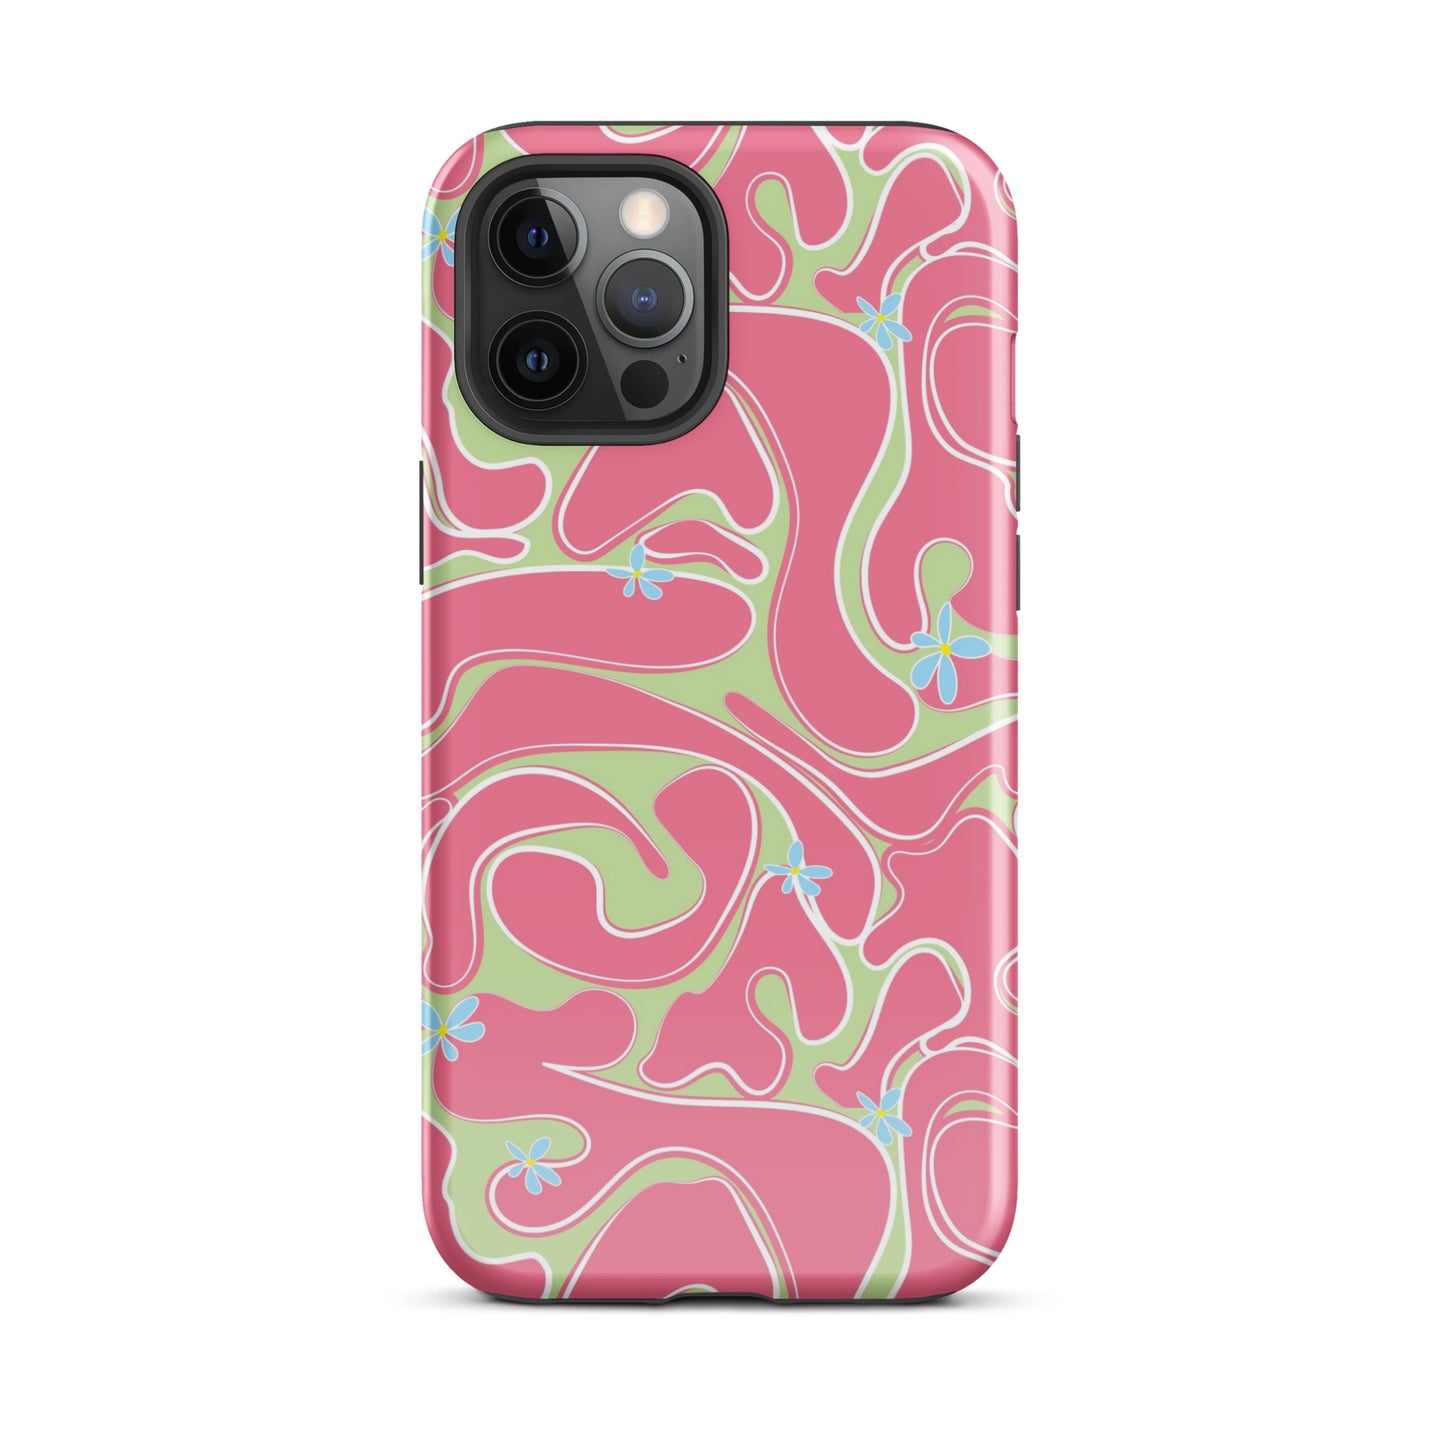 Reef Waves iPhone Case Glossy iPhone 12 Pro Max